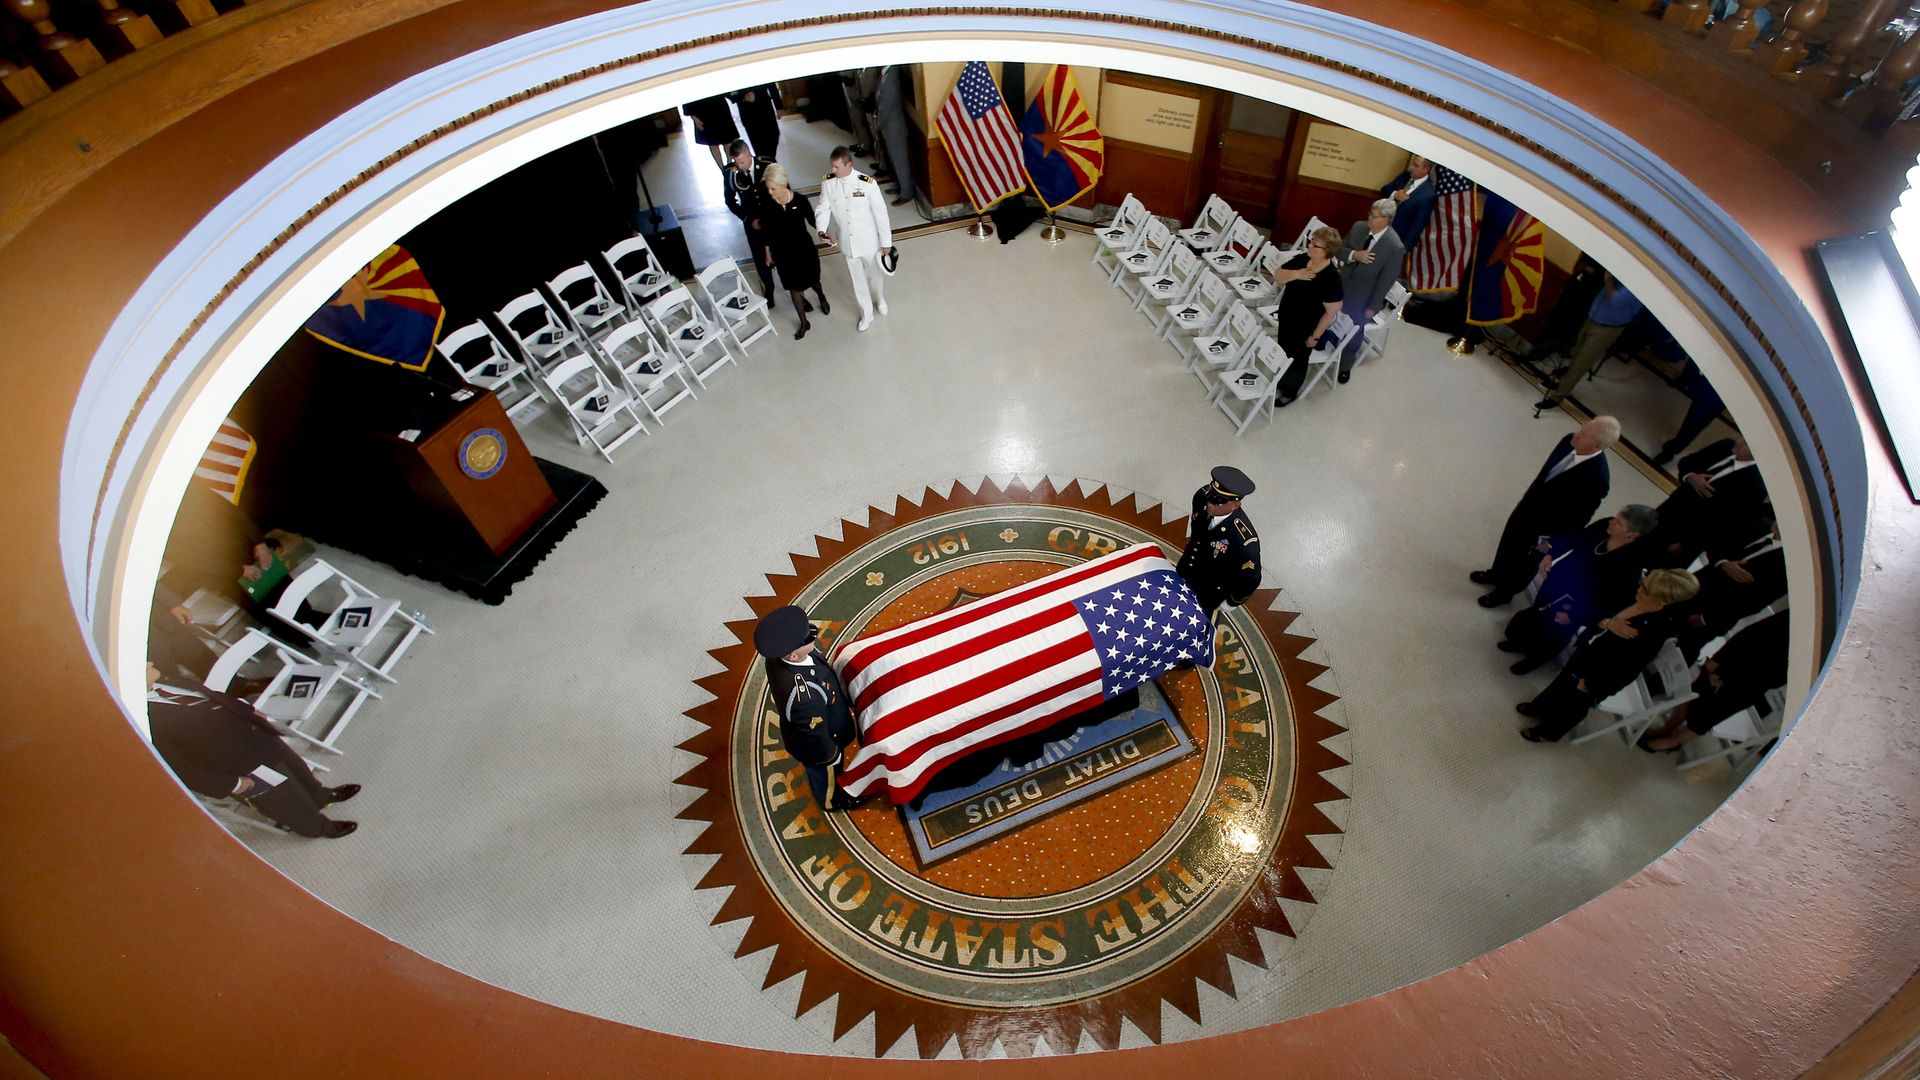 McCain's casket covered in an American flag, seen from above